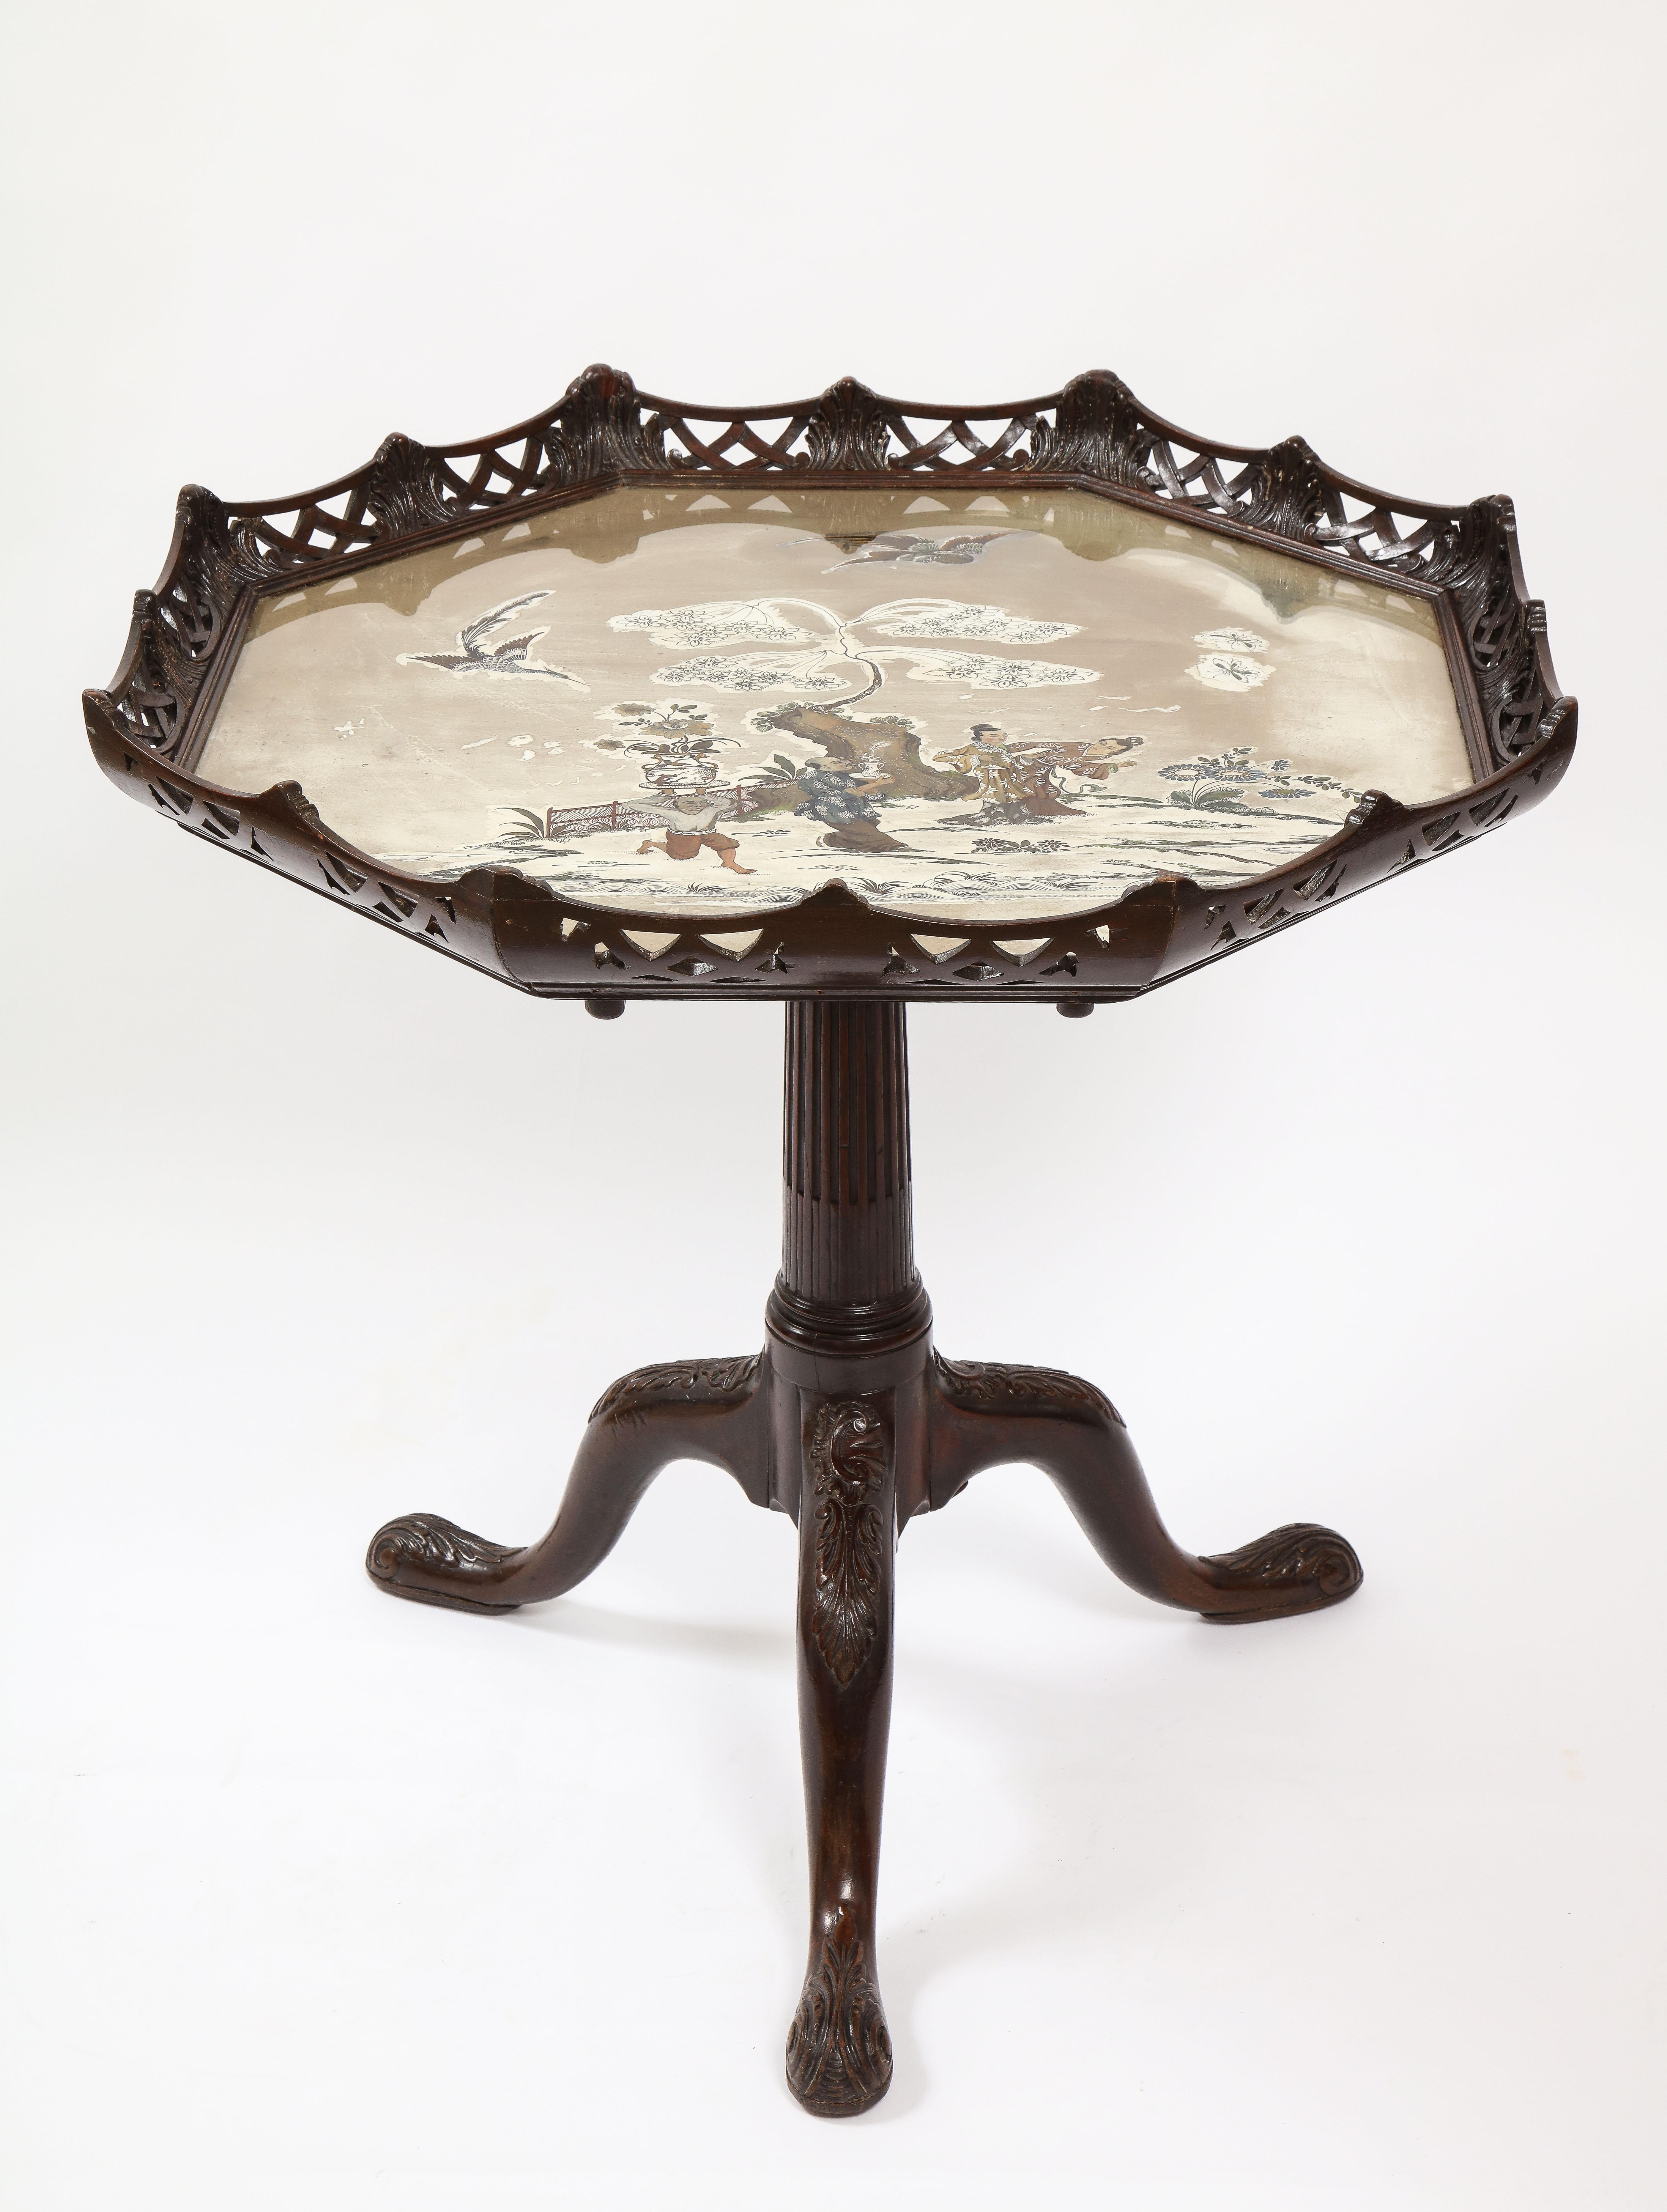 Hand-Carved English 19th C. Octagonal Tilt-Top Table w/ Chinoiseries Reverse on Glass Top For Sale